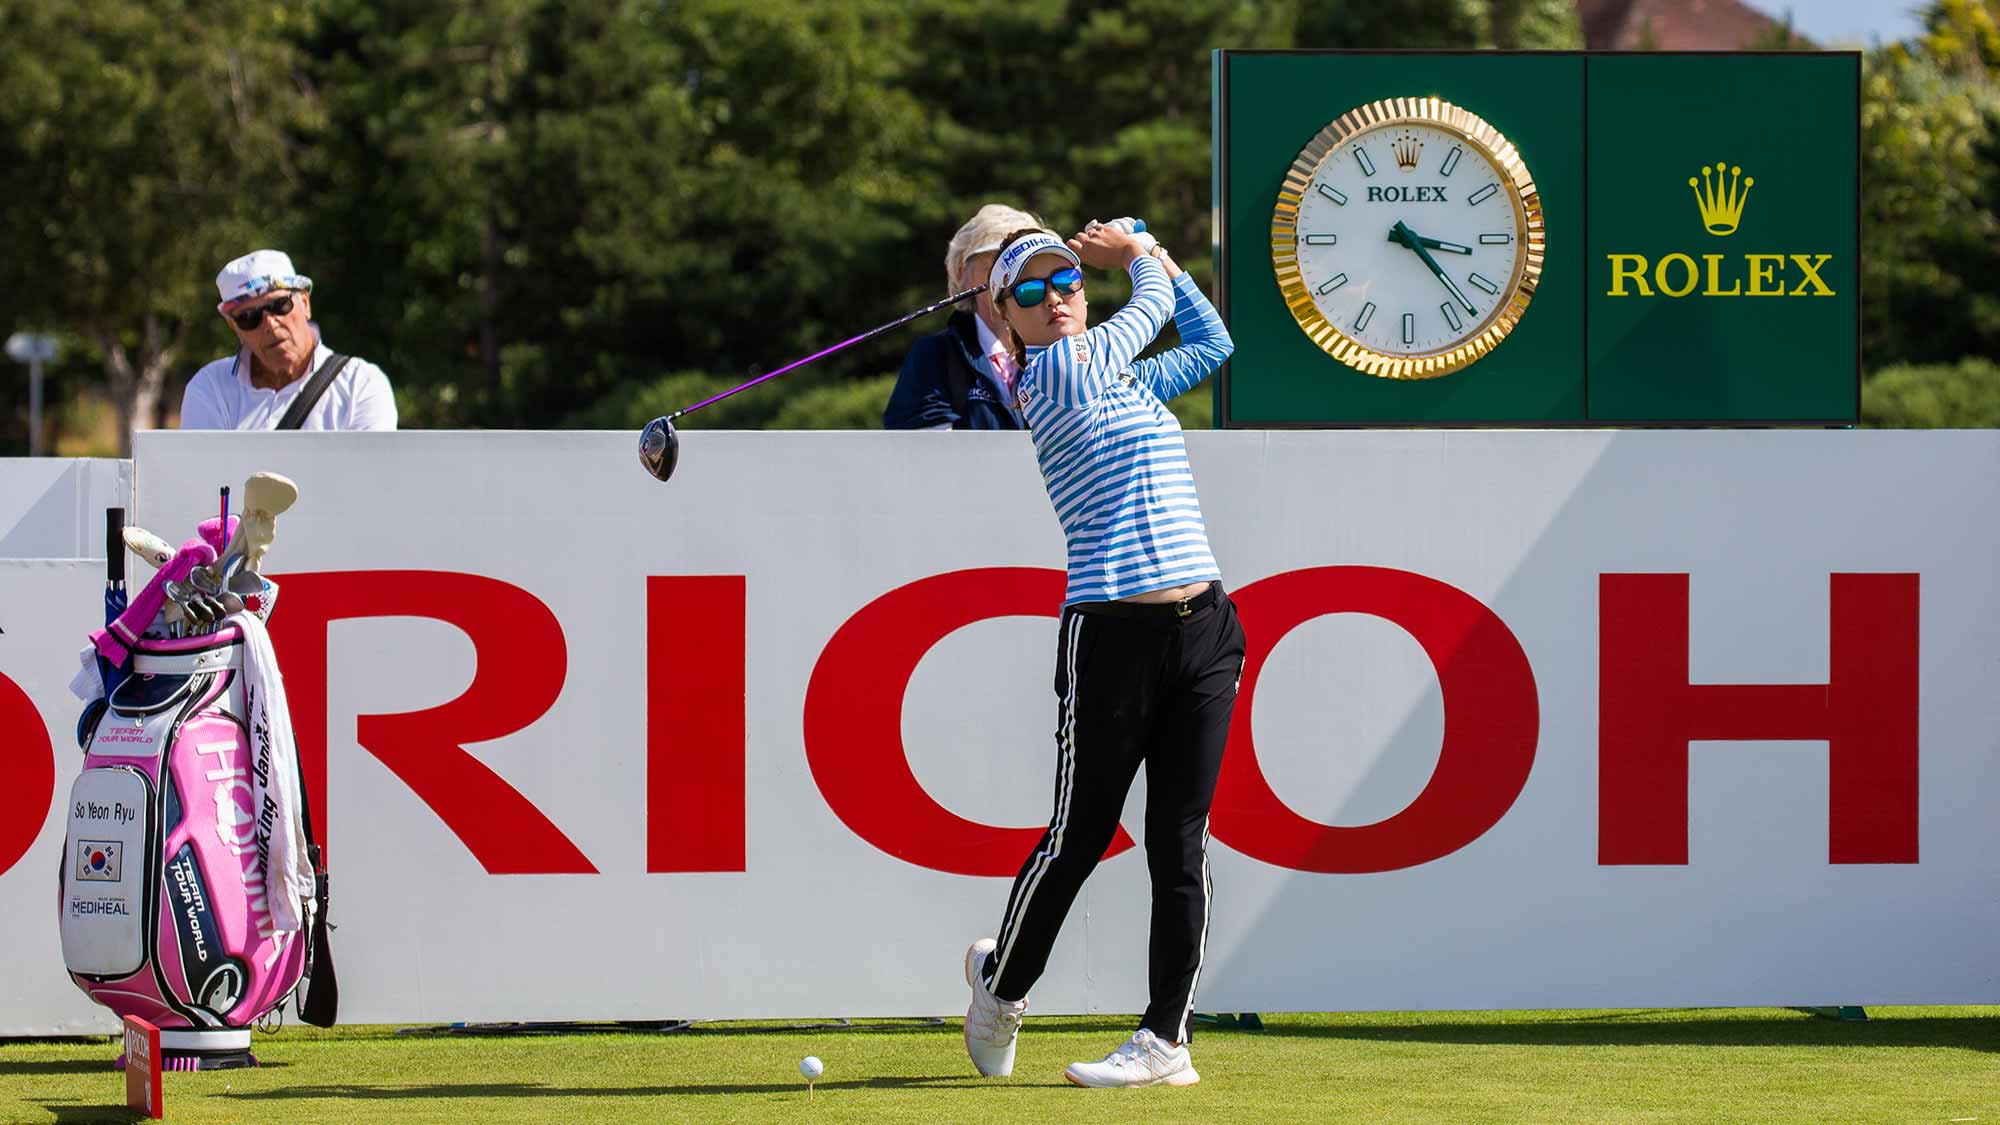 So Yeon Ryu Plays A Practice Round at Royal Lytham & St Annes During the 2018 Ricoh Women's British Open